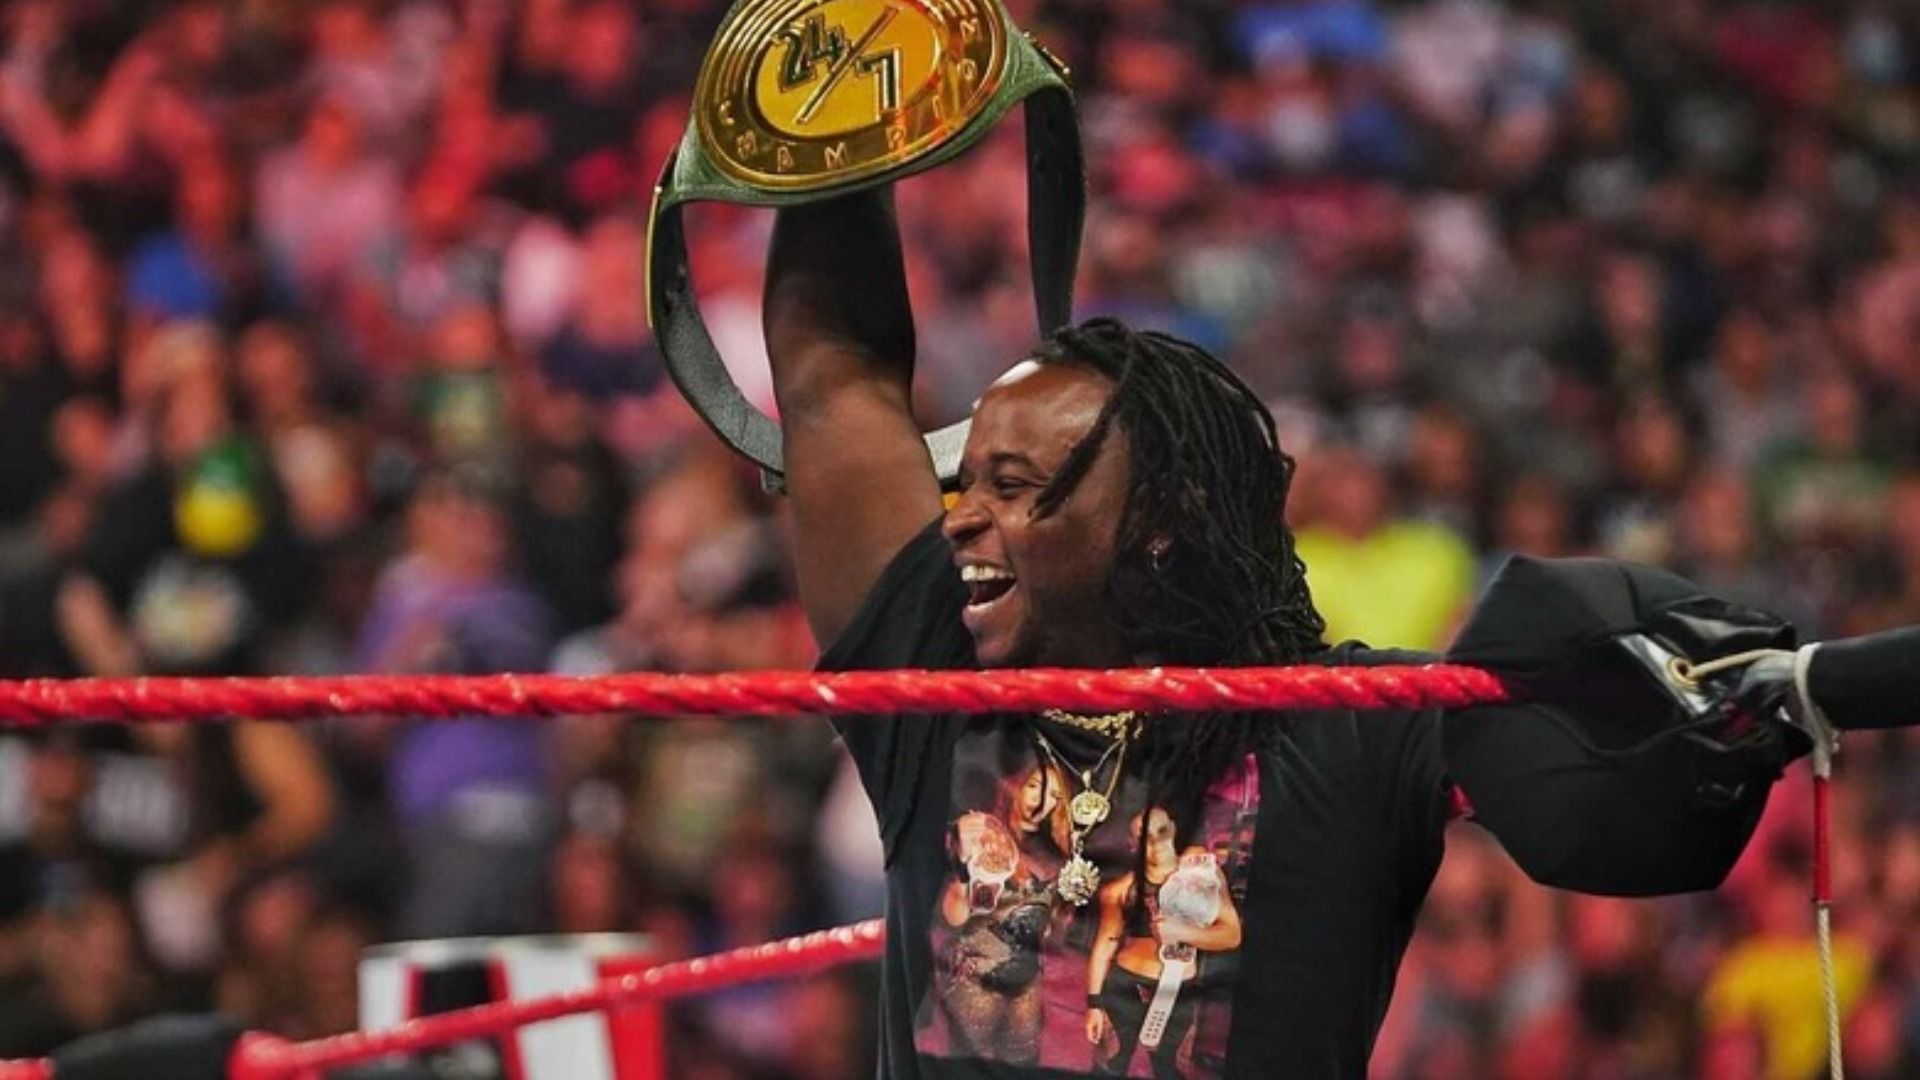 Reggie is a four-time WWE 24/7 Champion.